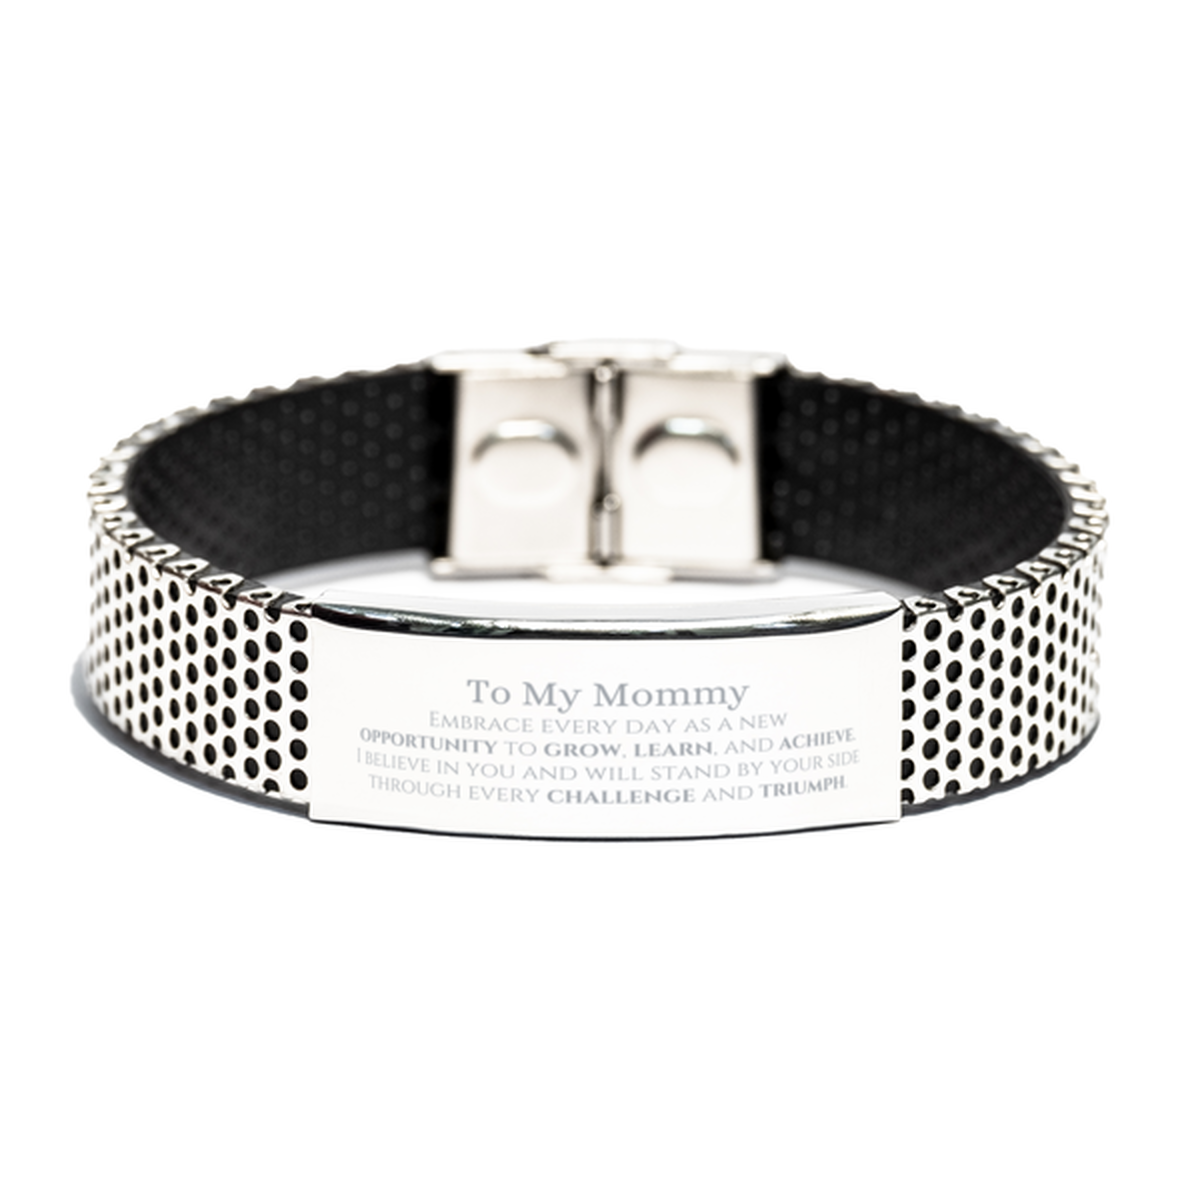 To My Mommy Gifts, I believe in you and will stand by your side, Inspirational Stainless Steel Bracelet For Mommy, Birthday Christmas Motivational Mommy Gifts